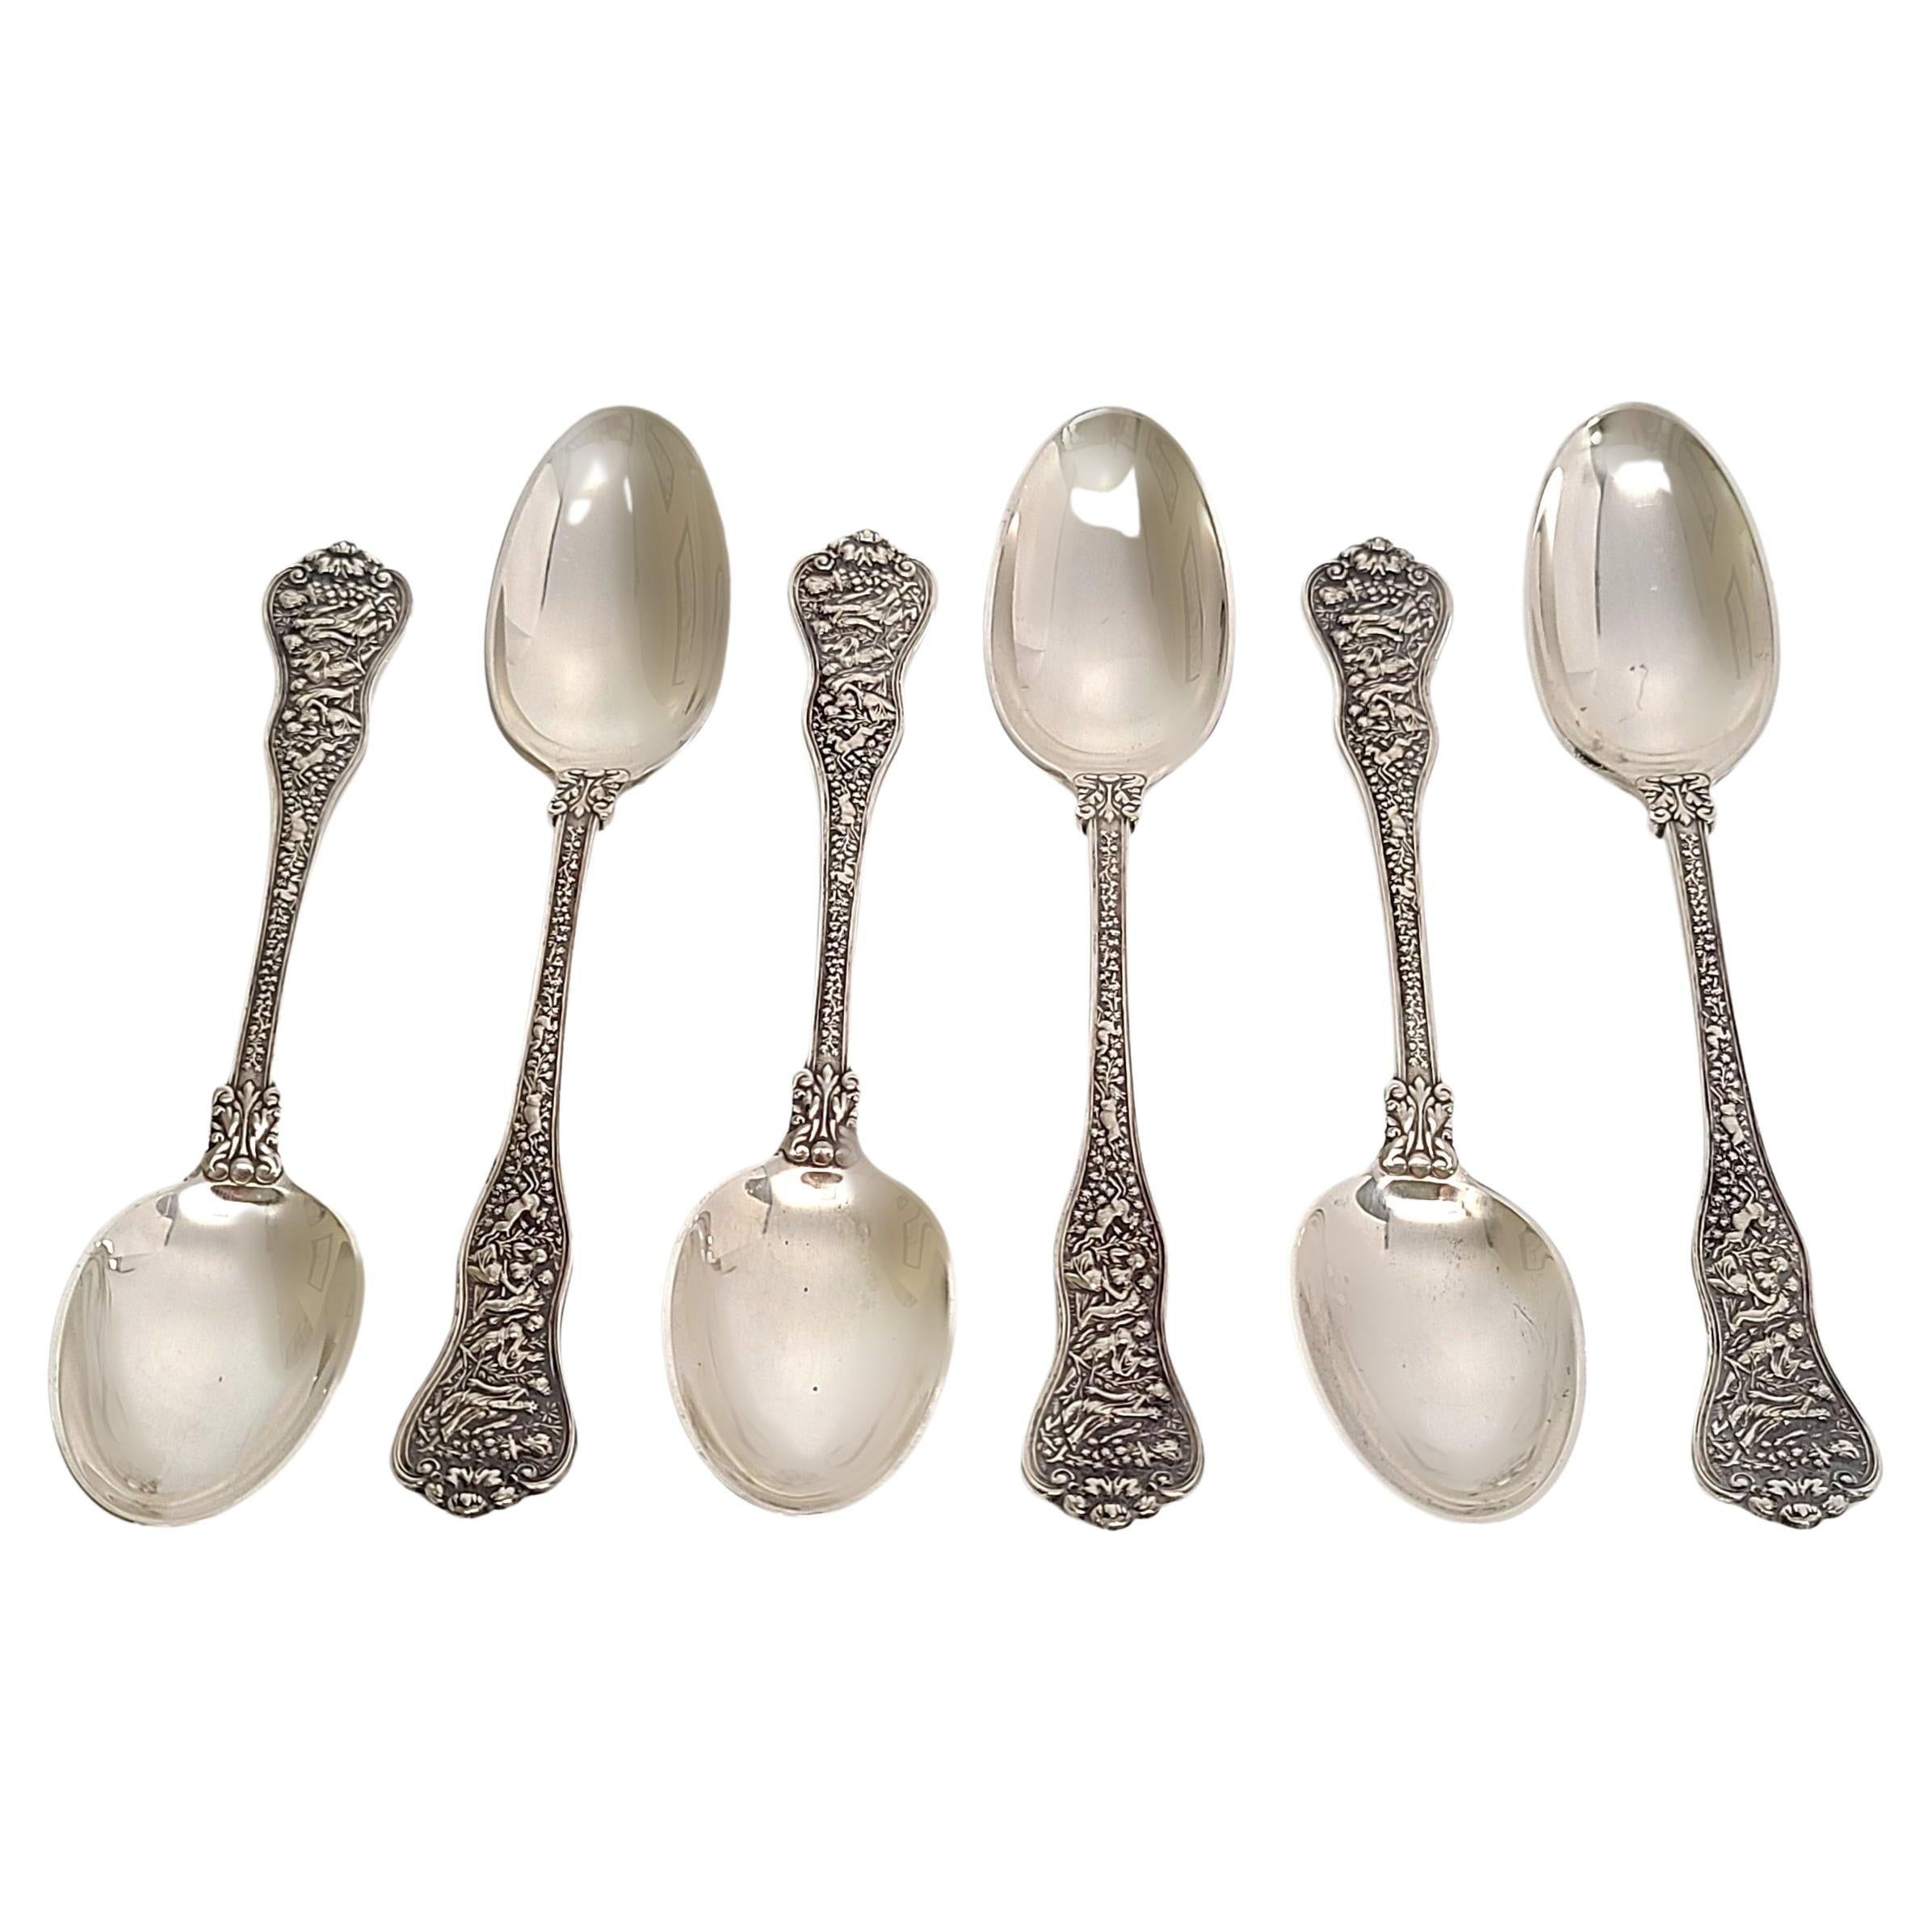 Set of 6 Tiffany & Co Olympian Sterling Silver Teaspoons with Monogram